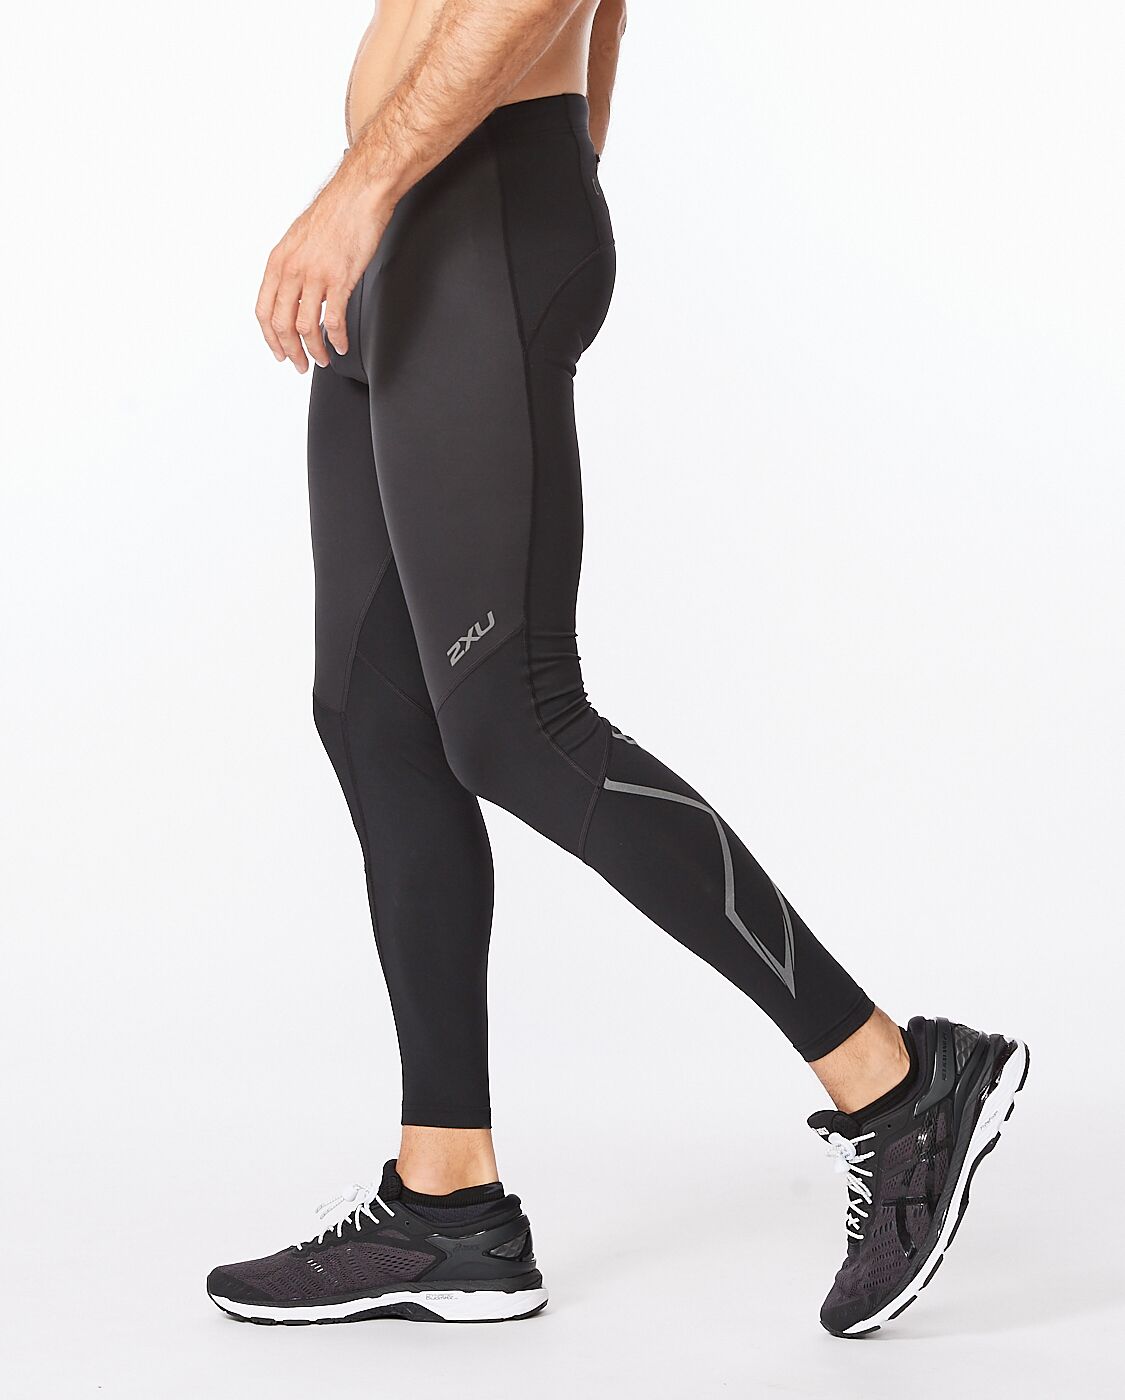 2XU Ignition Shield Comp Tights - Clothing